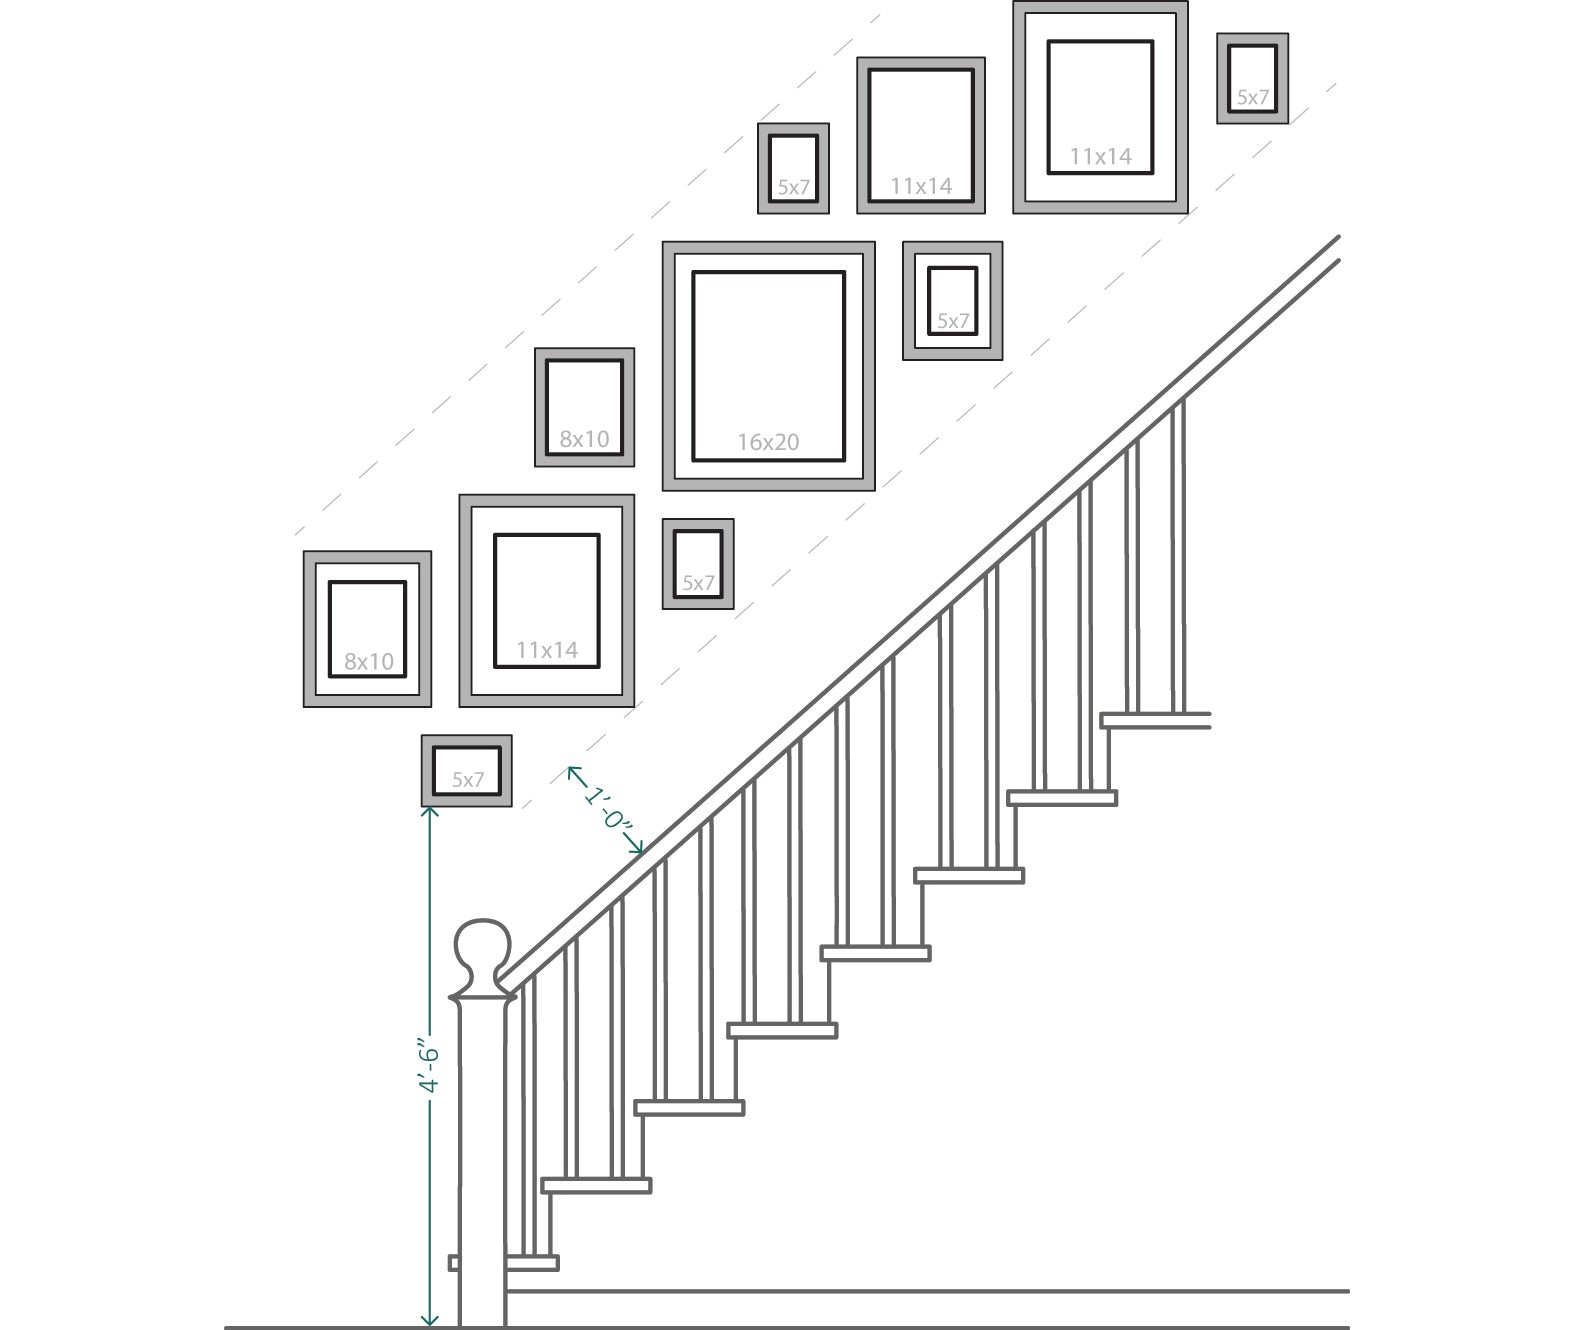 A diagram for recommended artwork sizes along a staircase